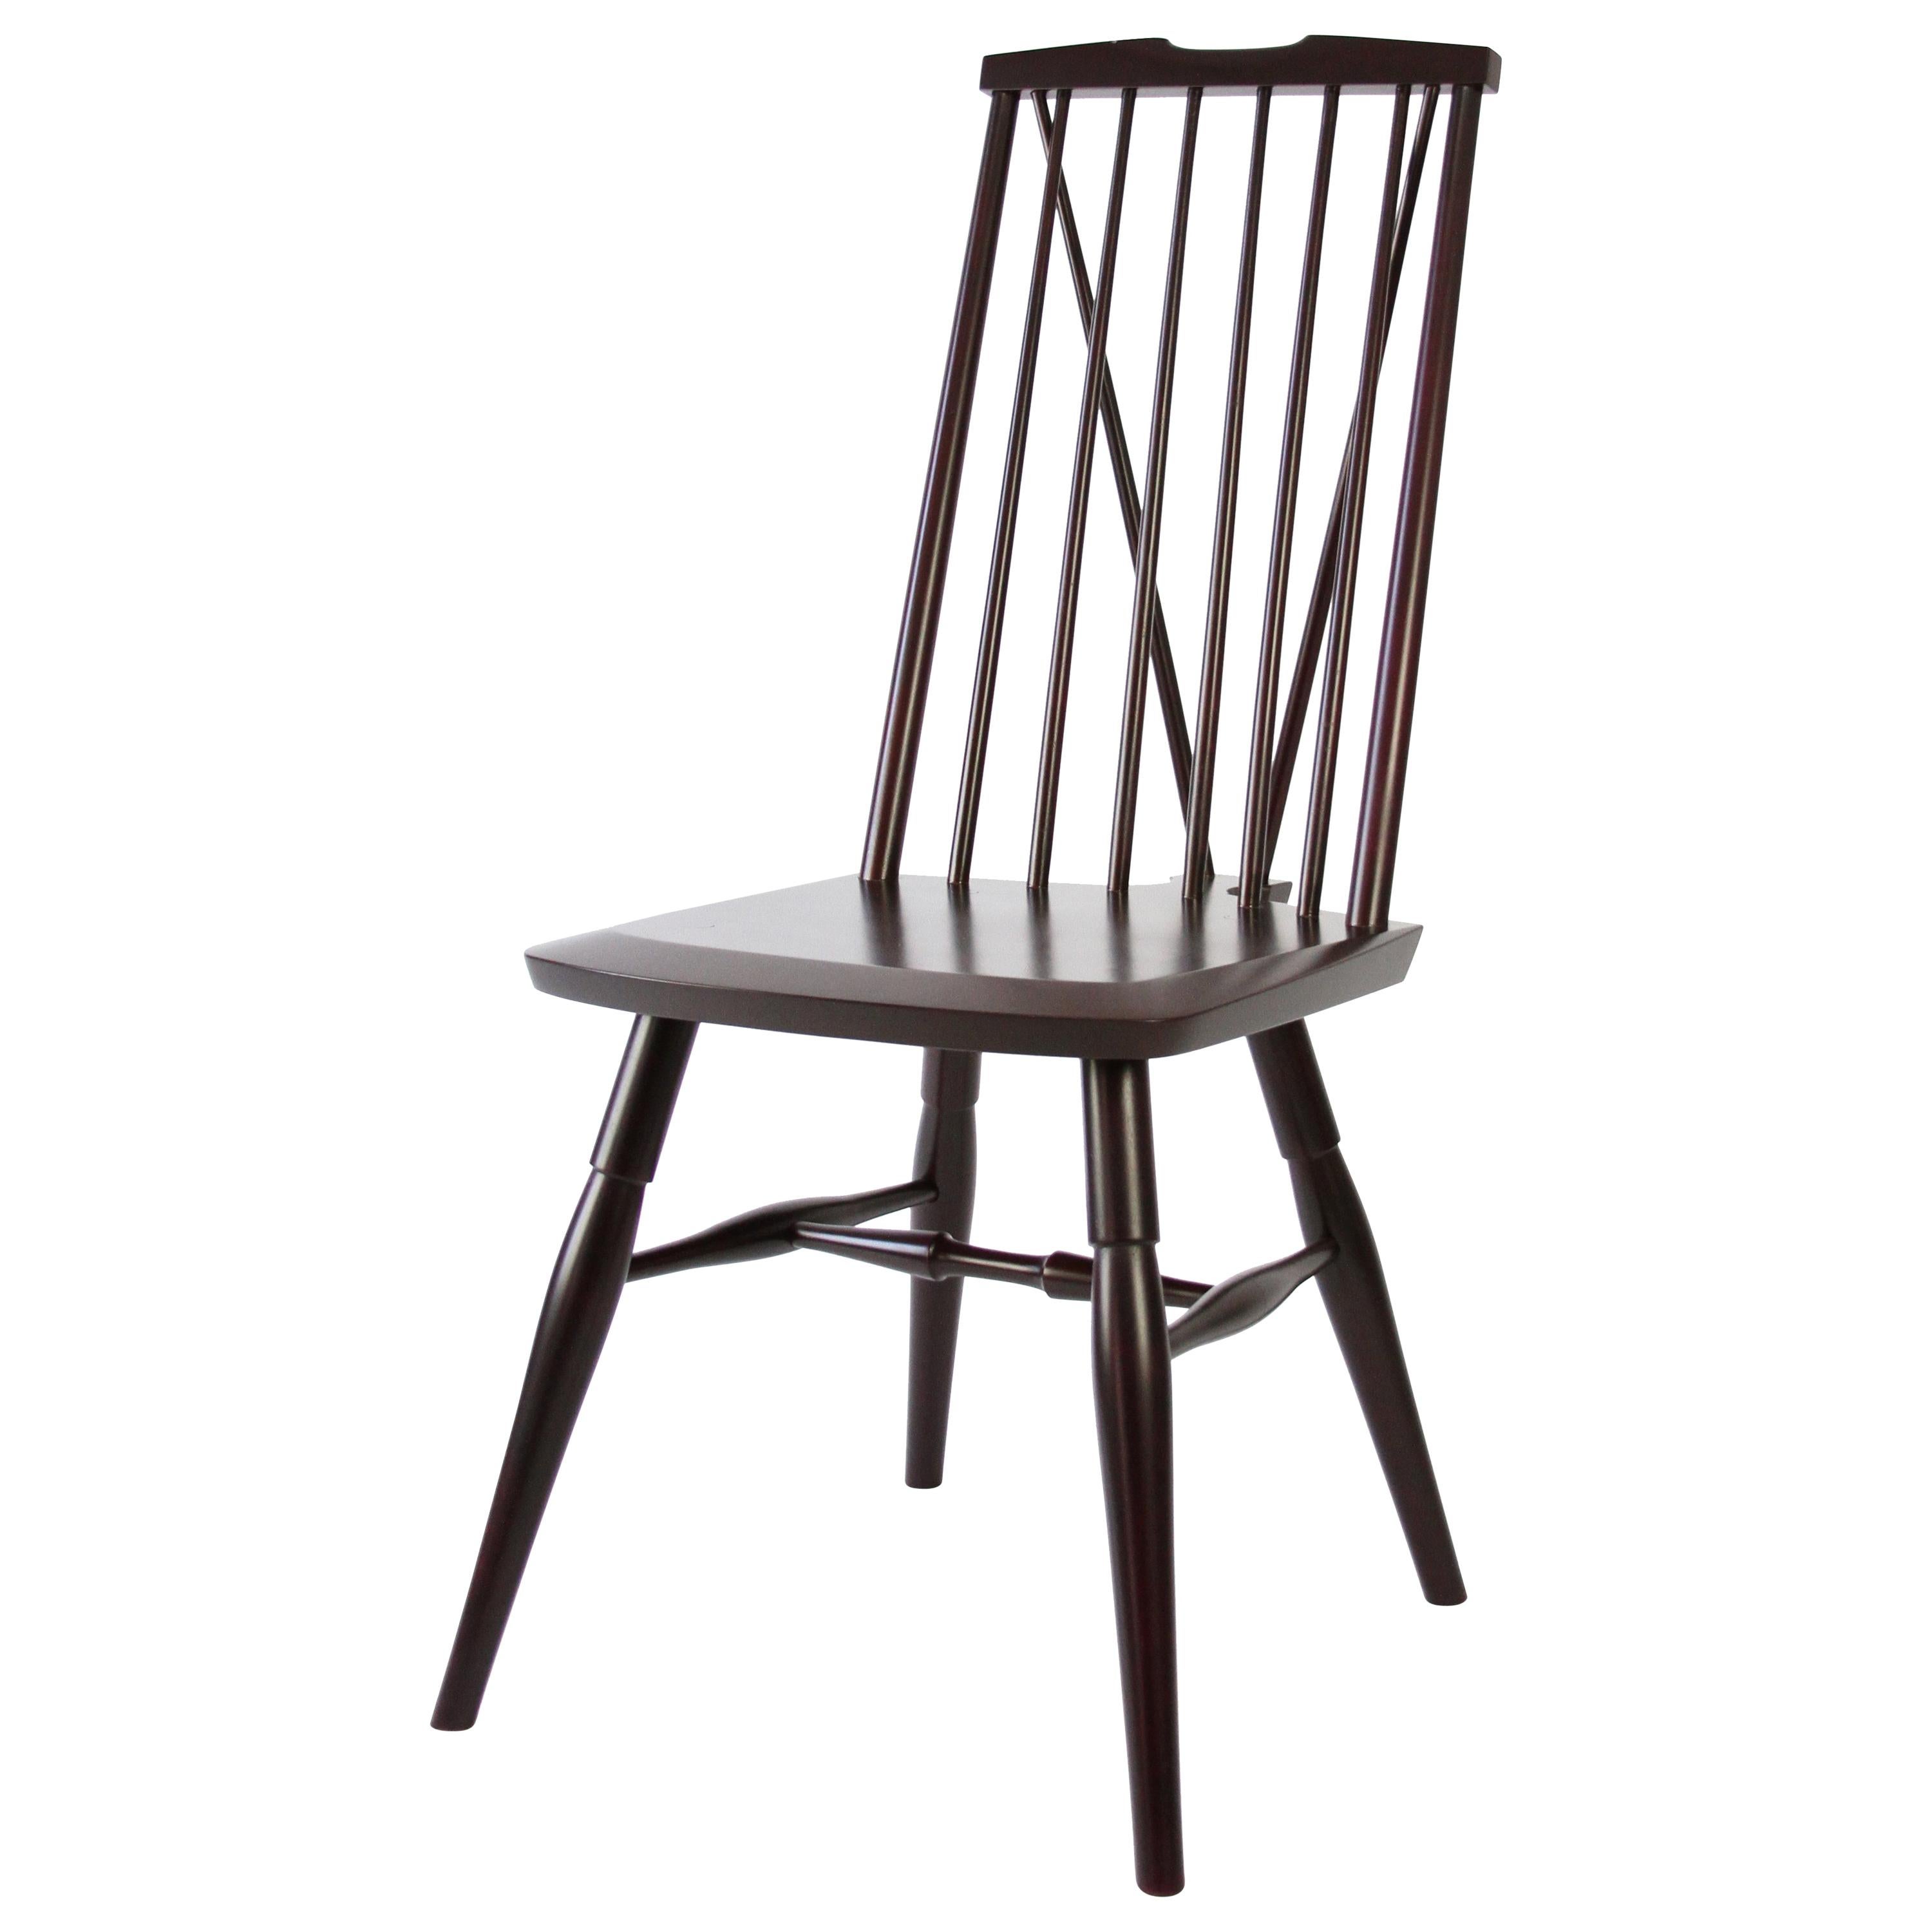 Aquinnah Side Chair, Contemporary Windsor Chair For Sale